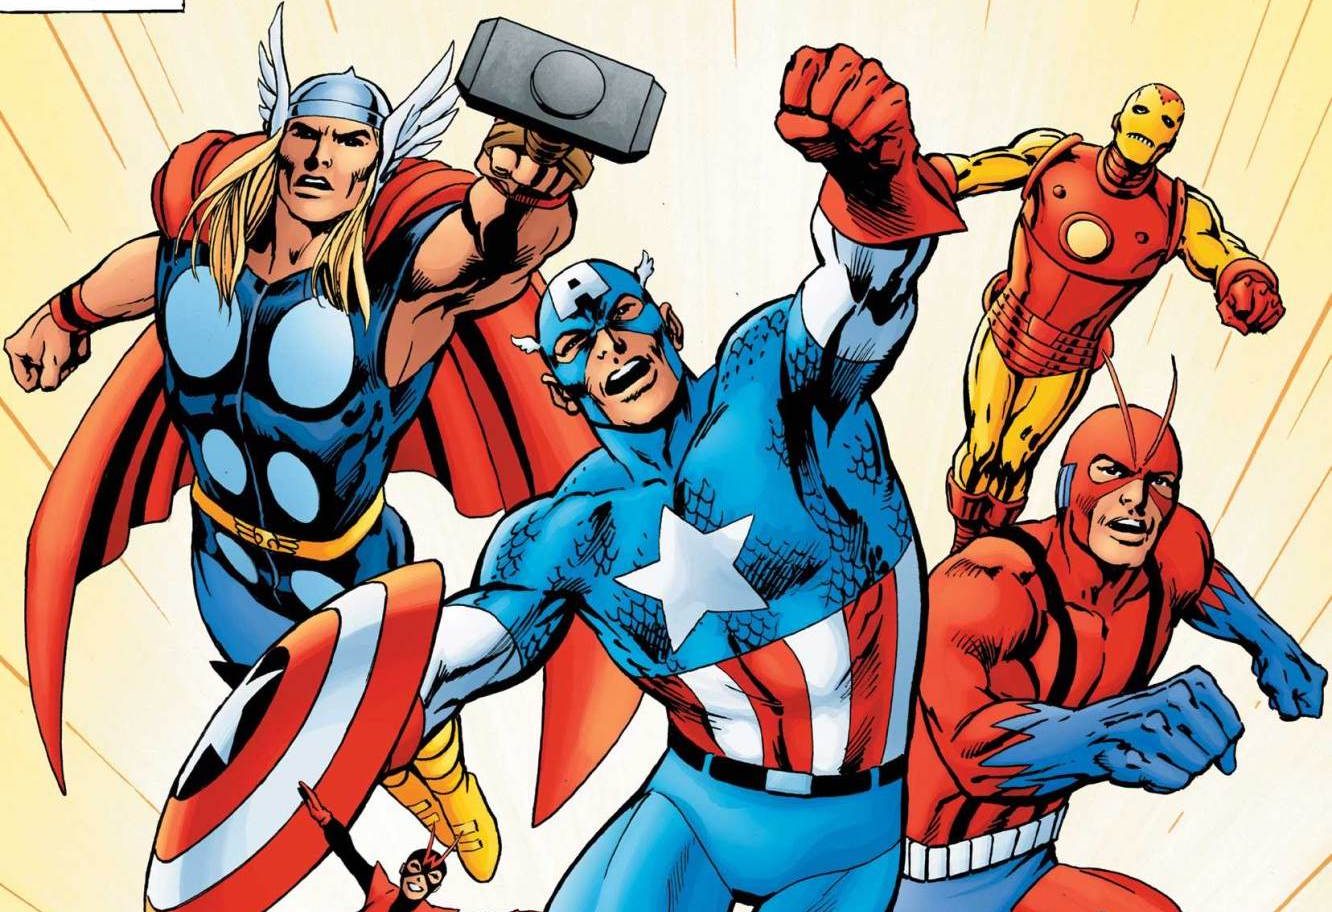 'Avengers: War Across Time' harnesses everything good about the original Avengers